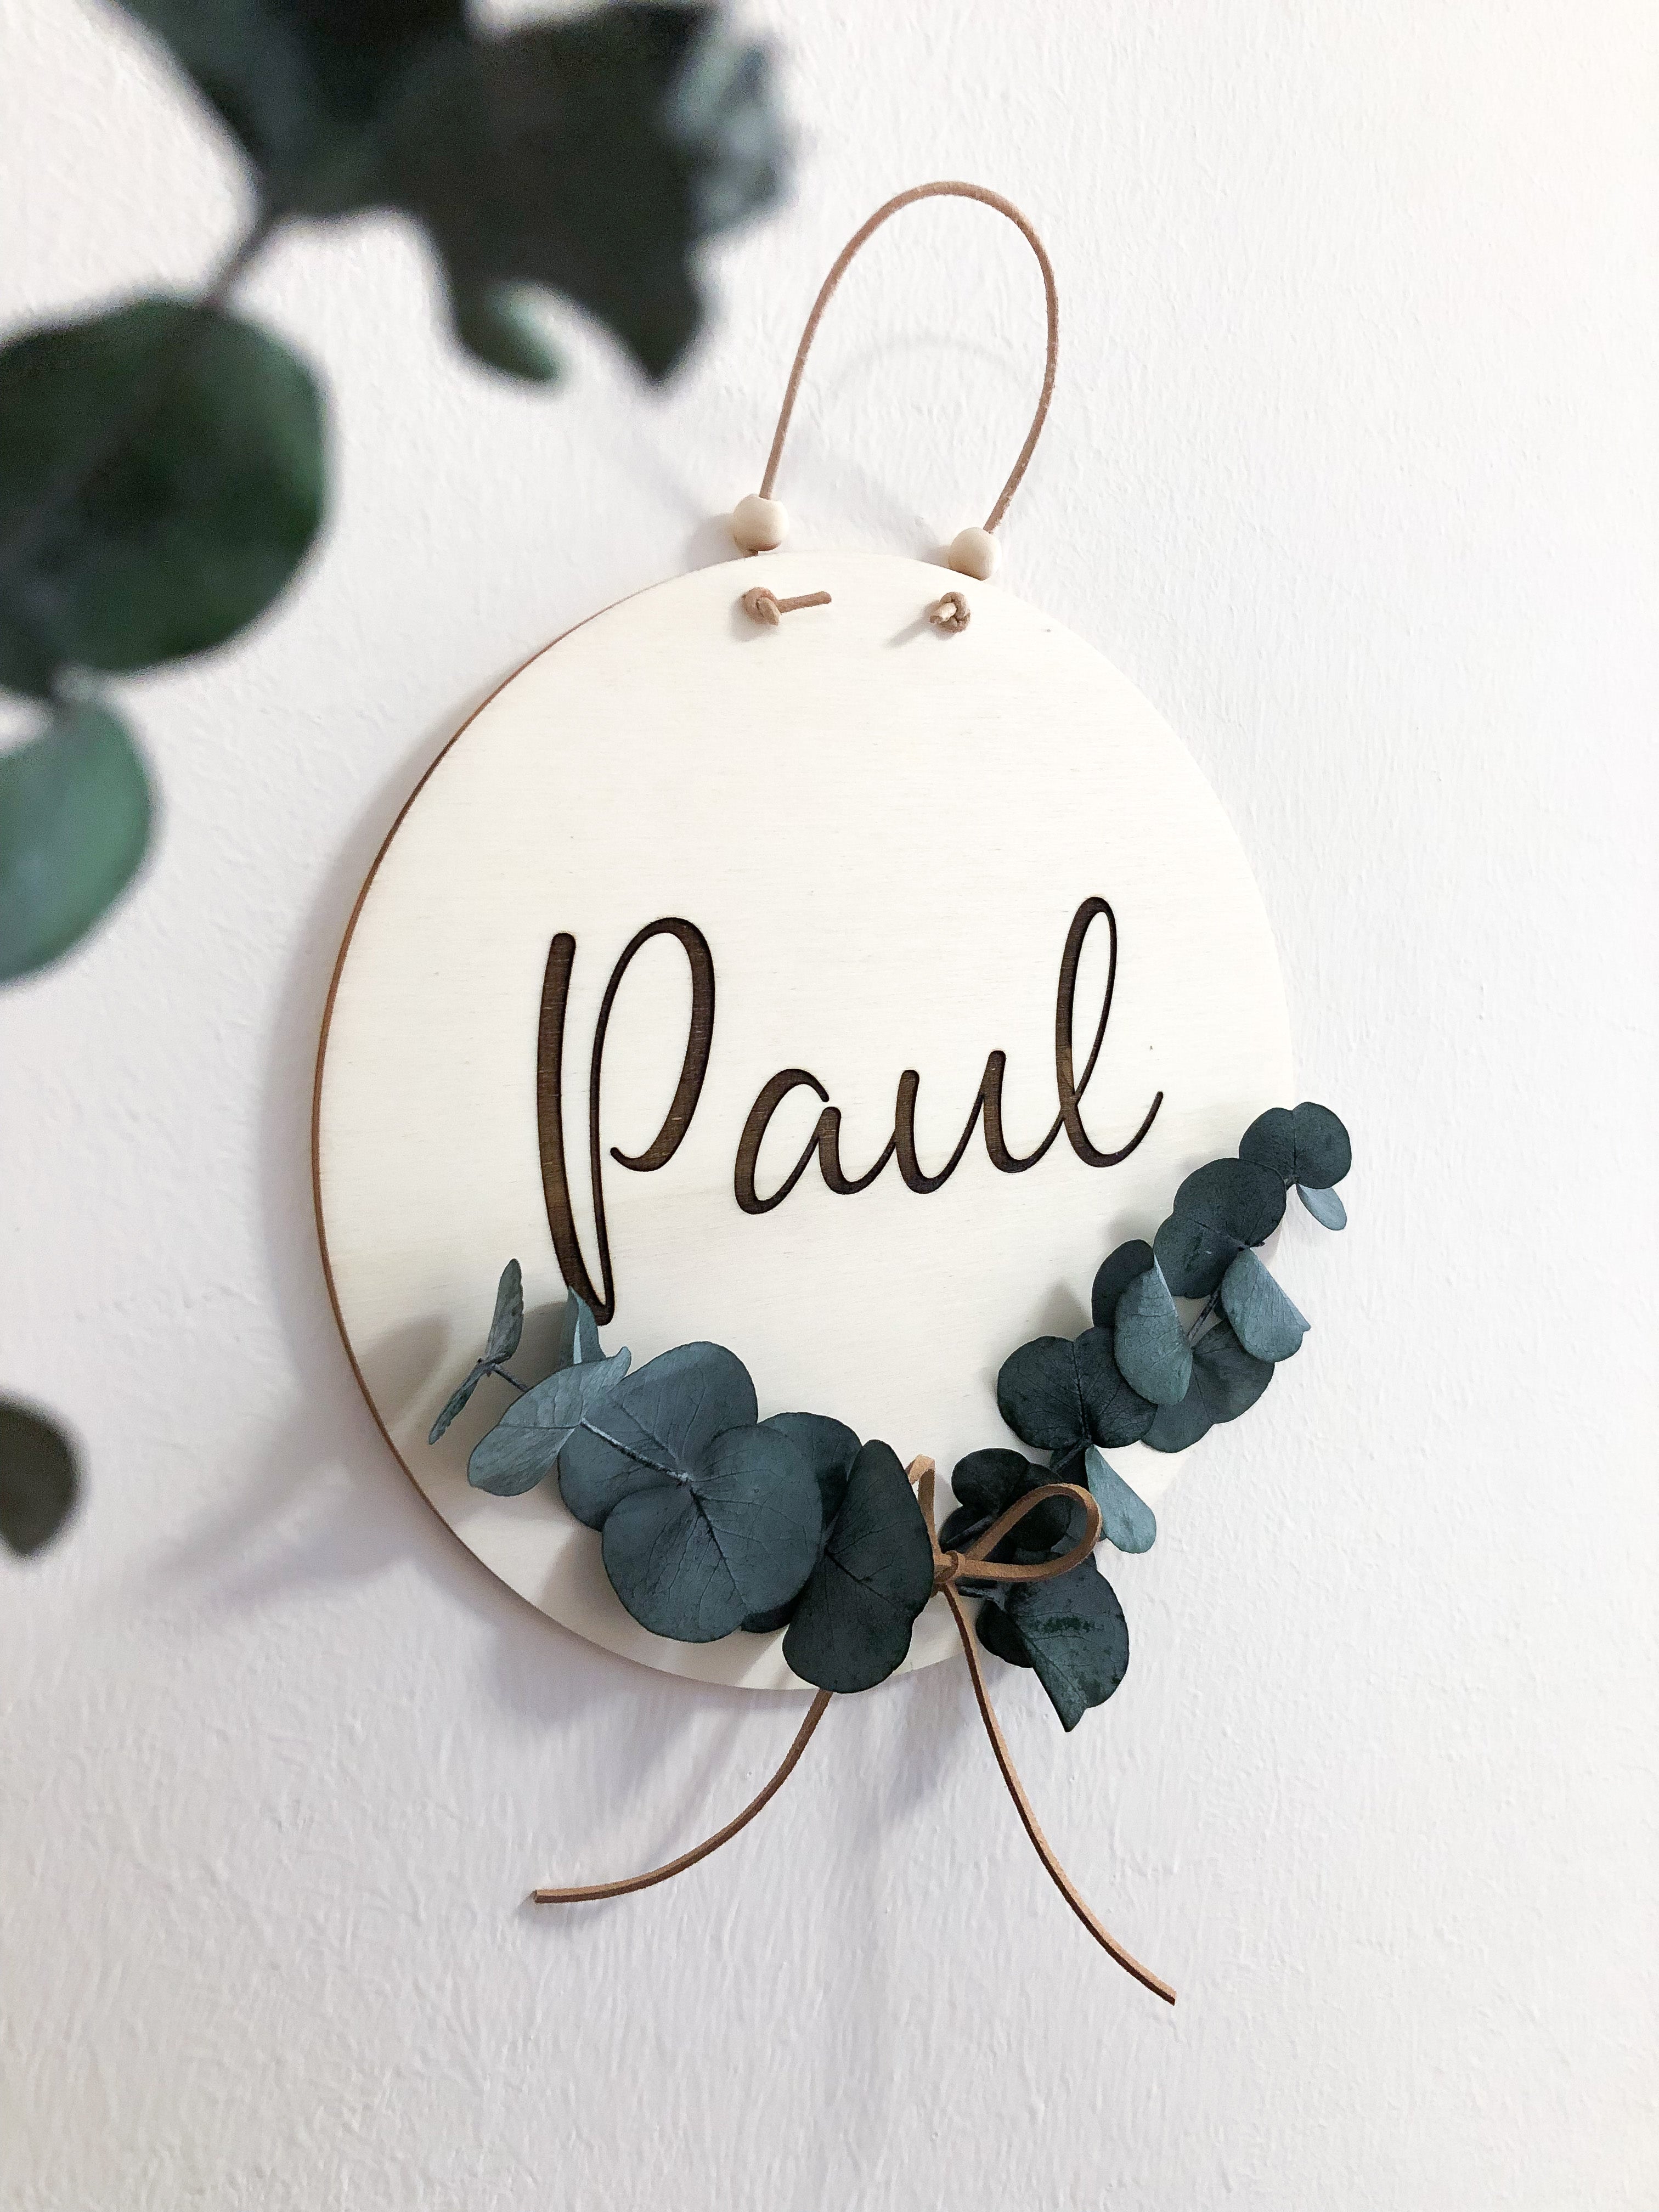 Name tag personalized with eucalyptus